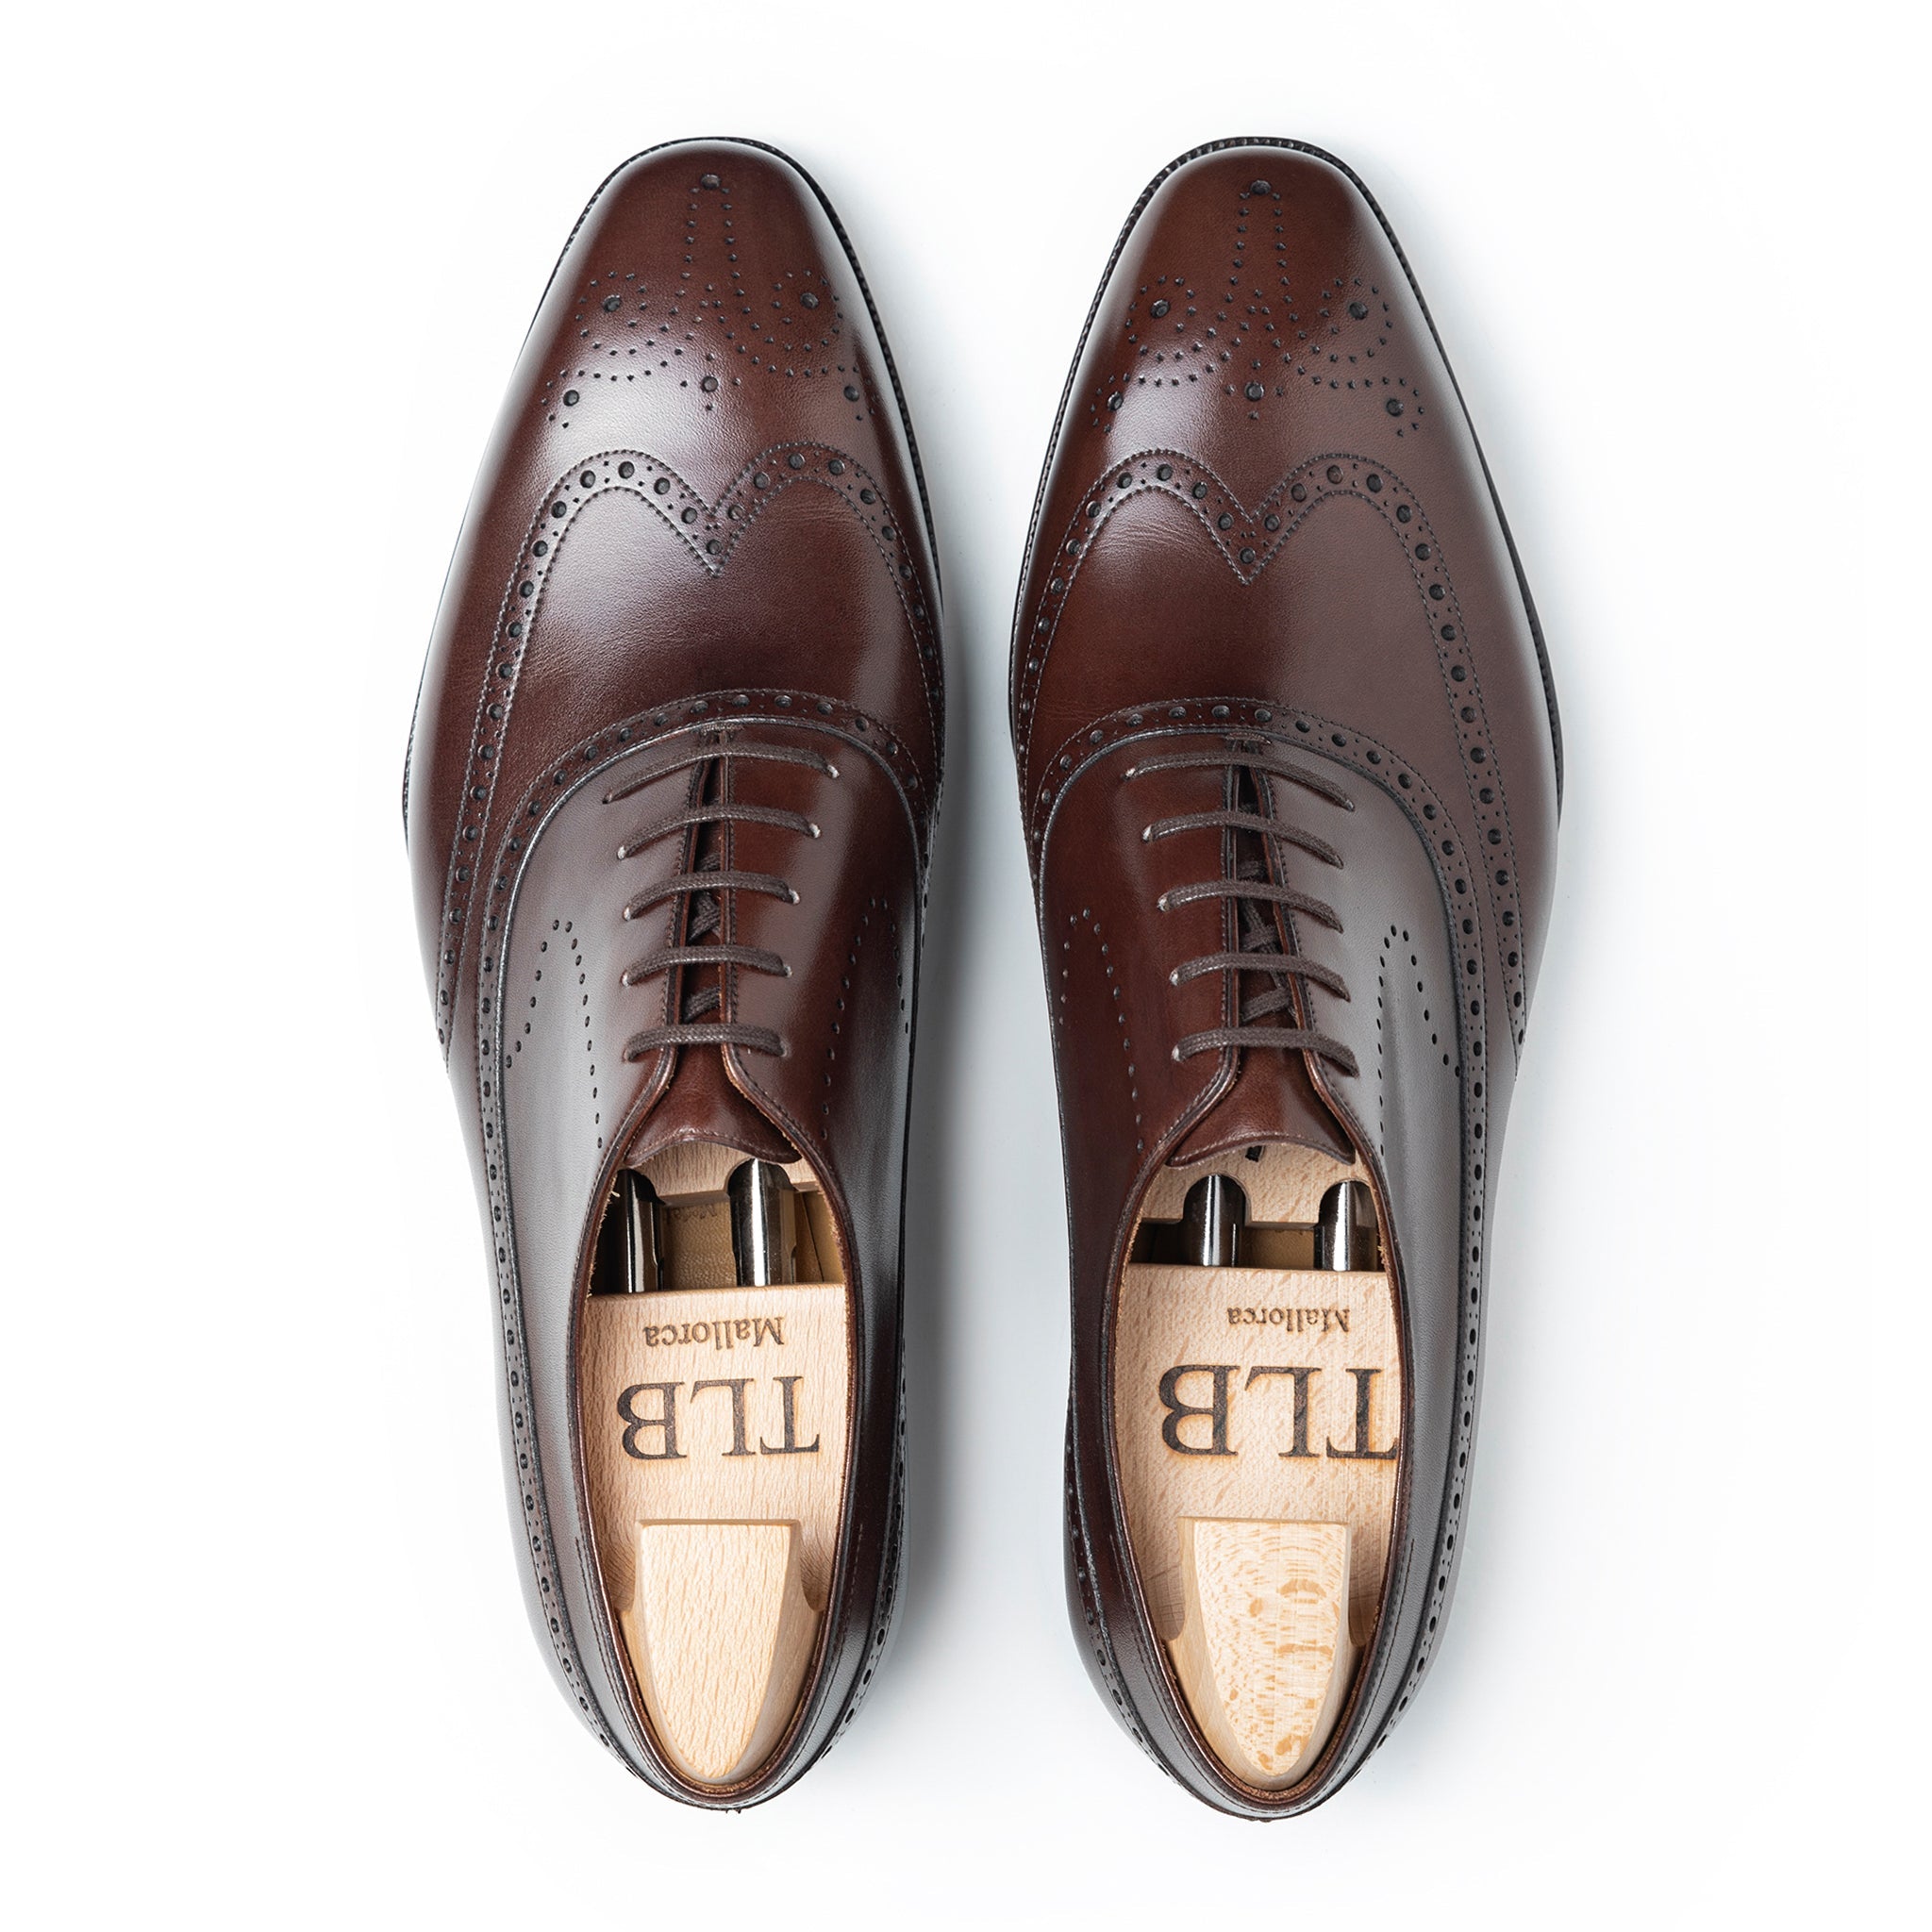 TLB Mallorca | Men's leather shoes | Oxford Shoes Artista 